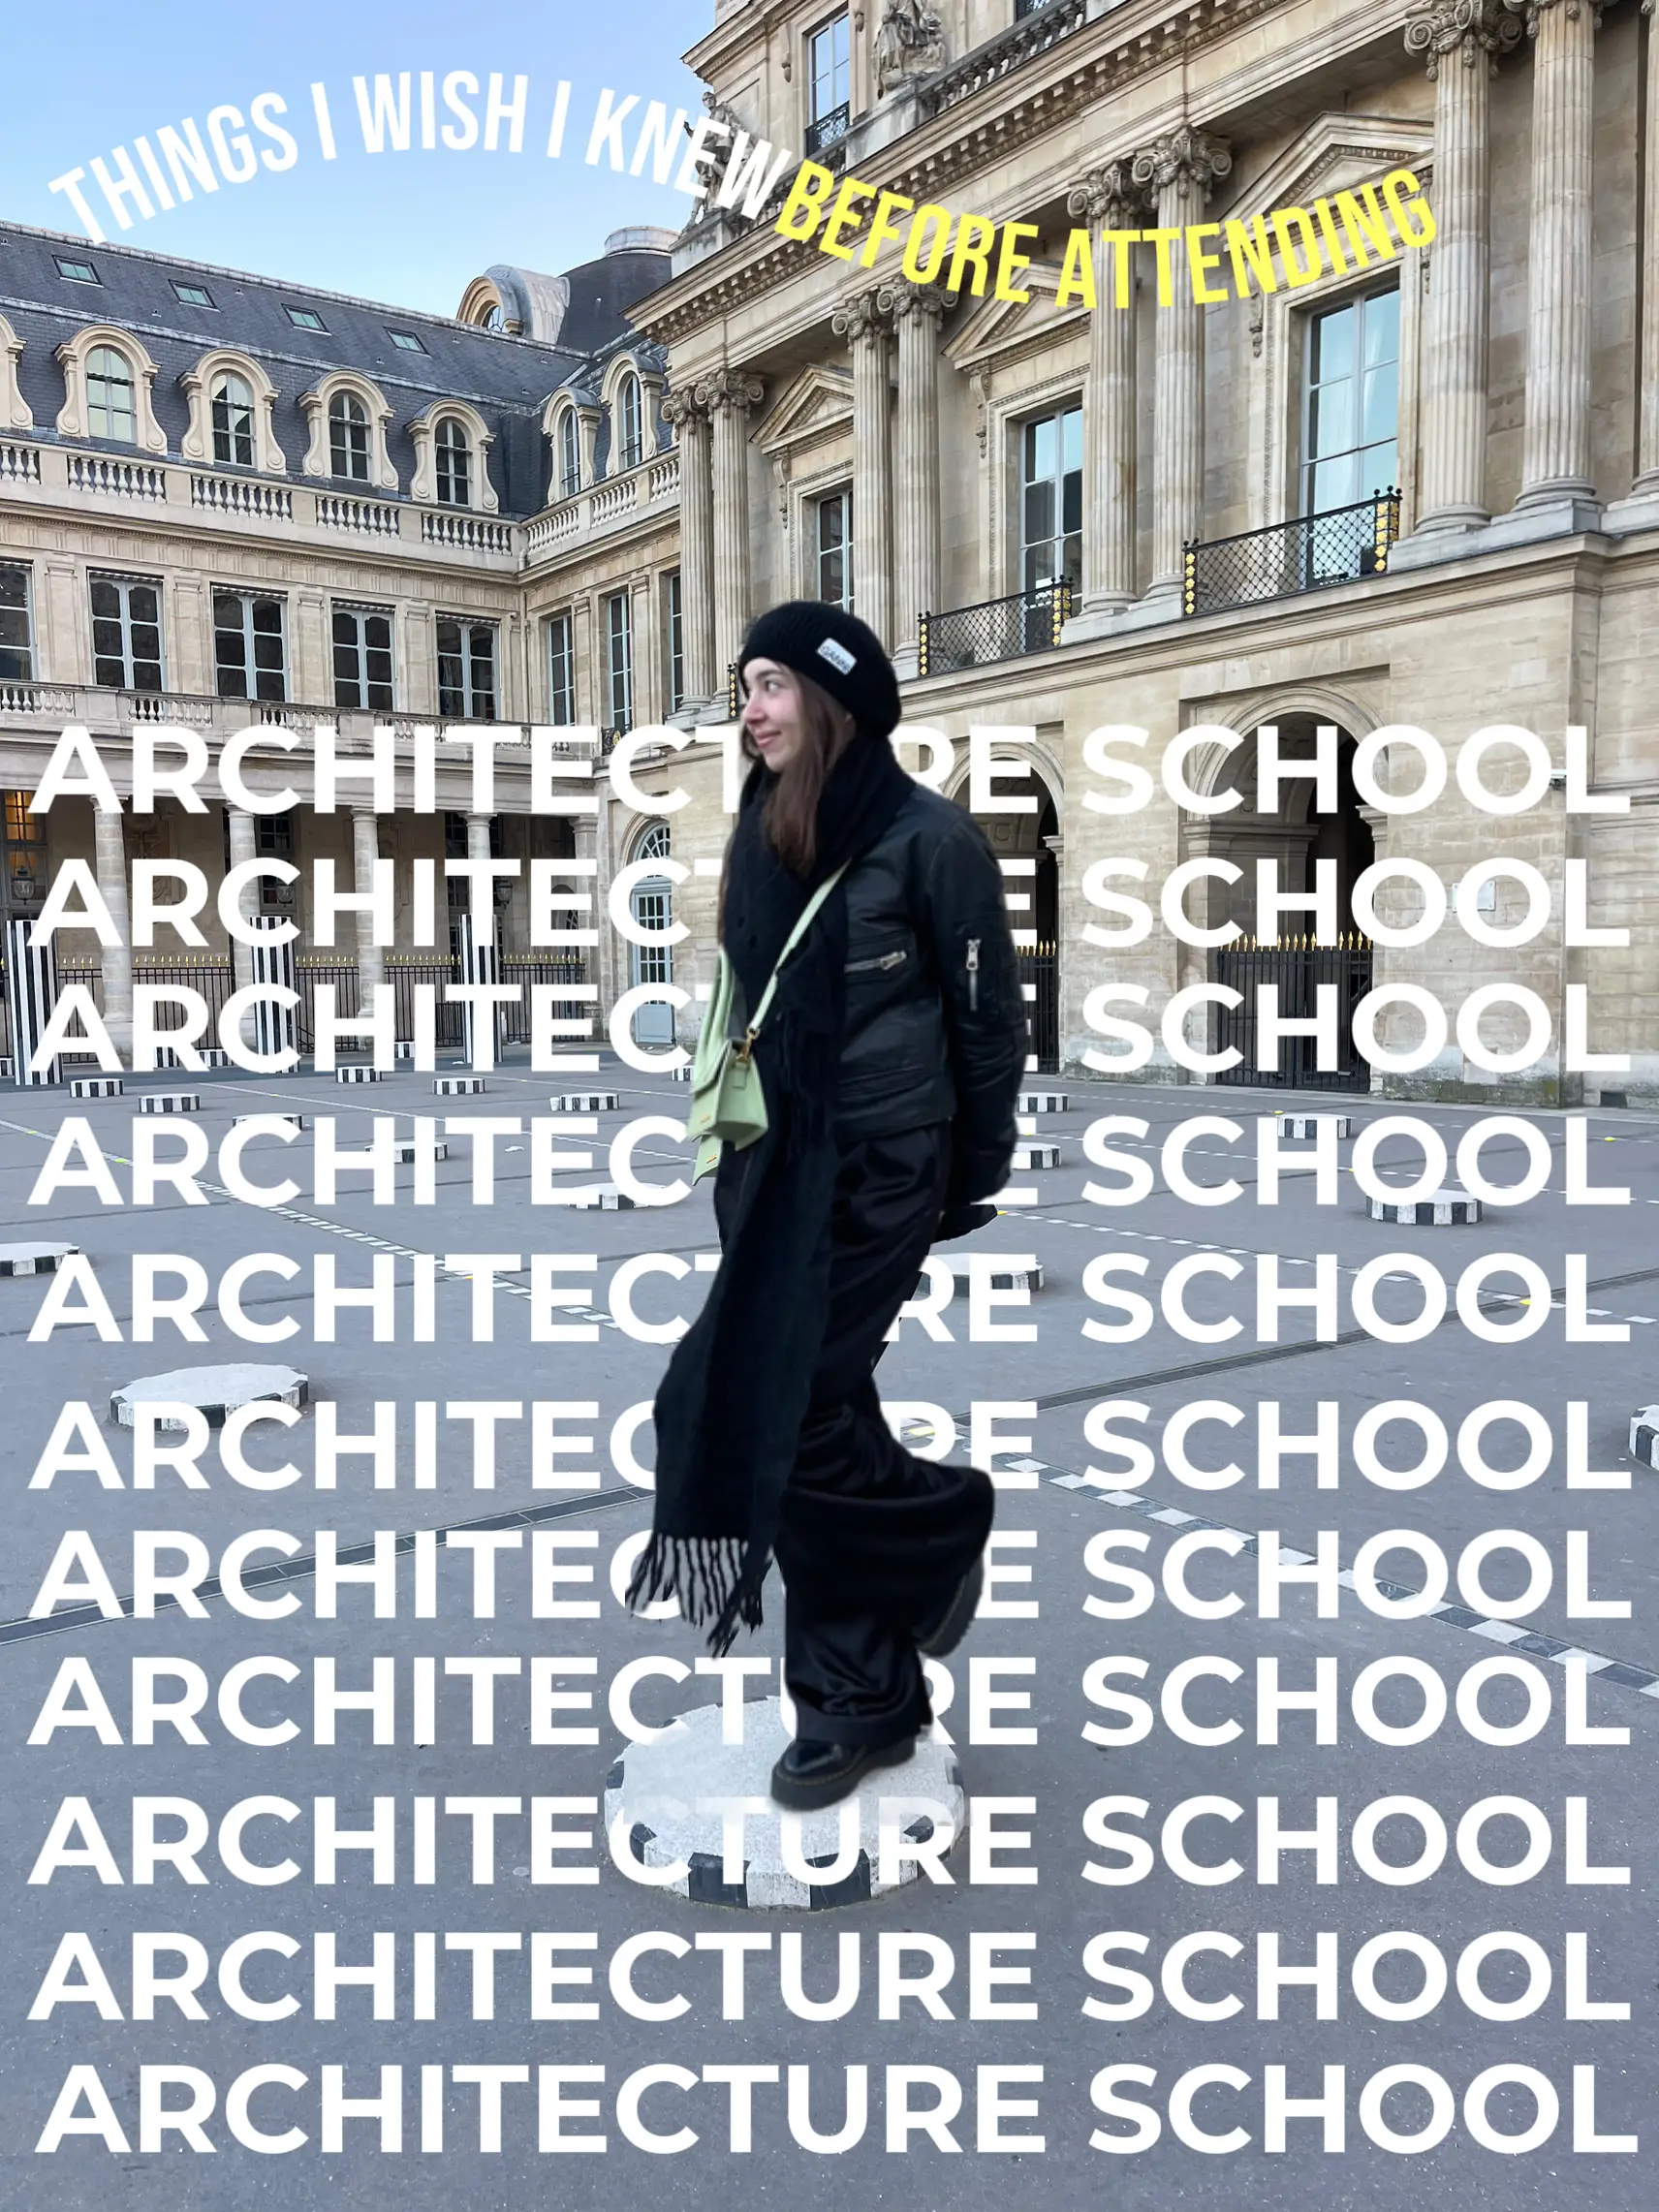  A woman is walking in front of a building with a sign that says "Architecture School".